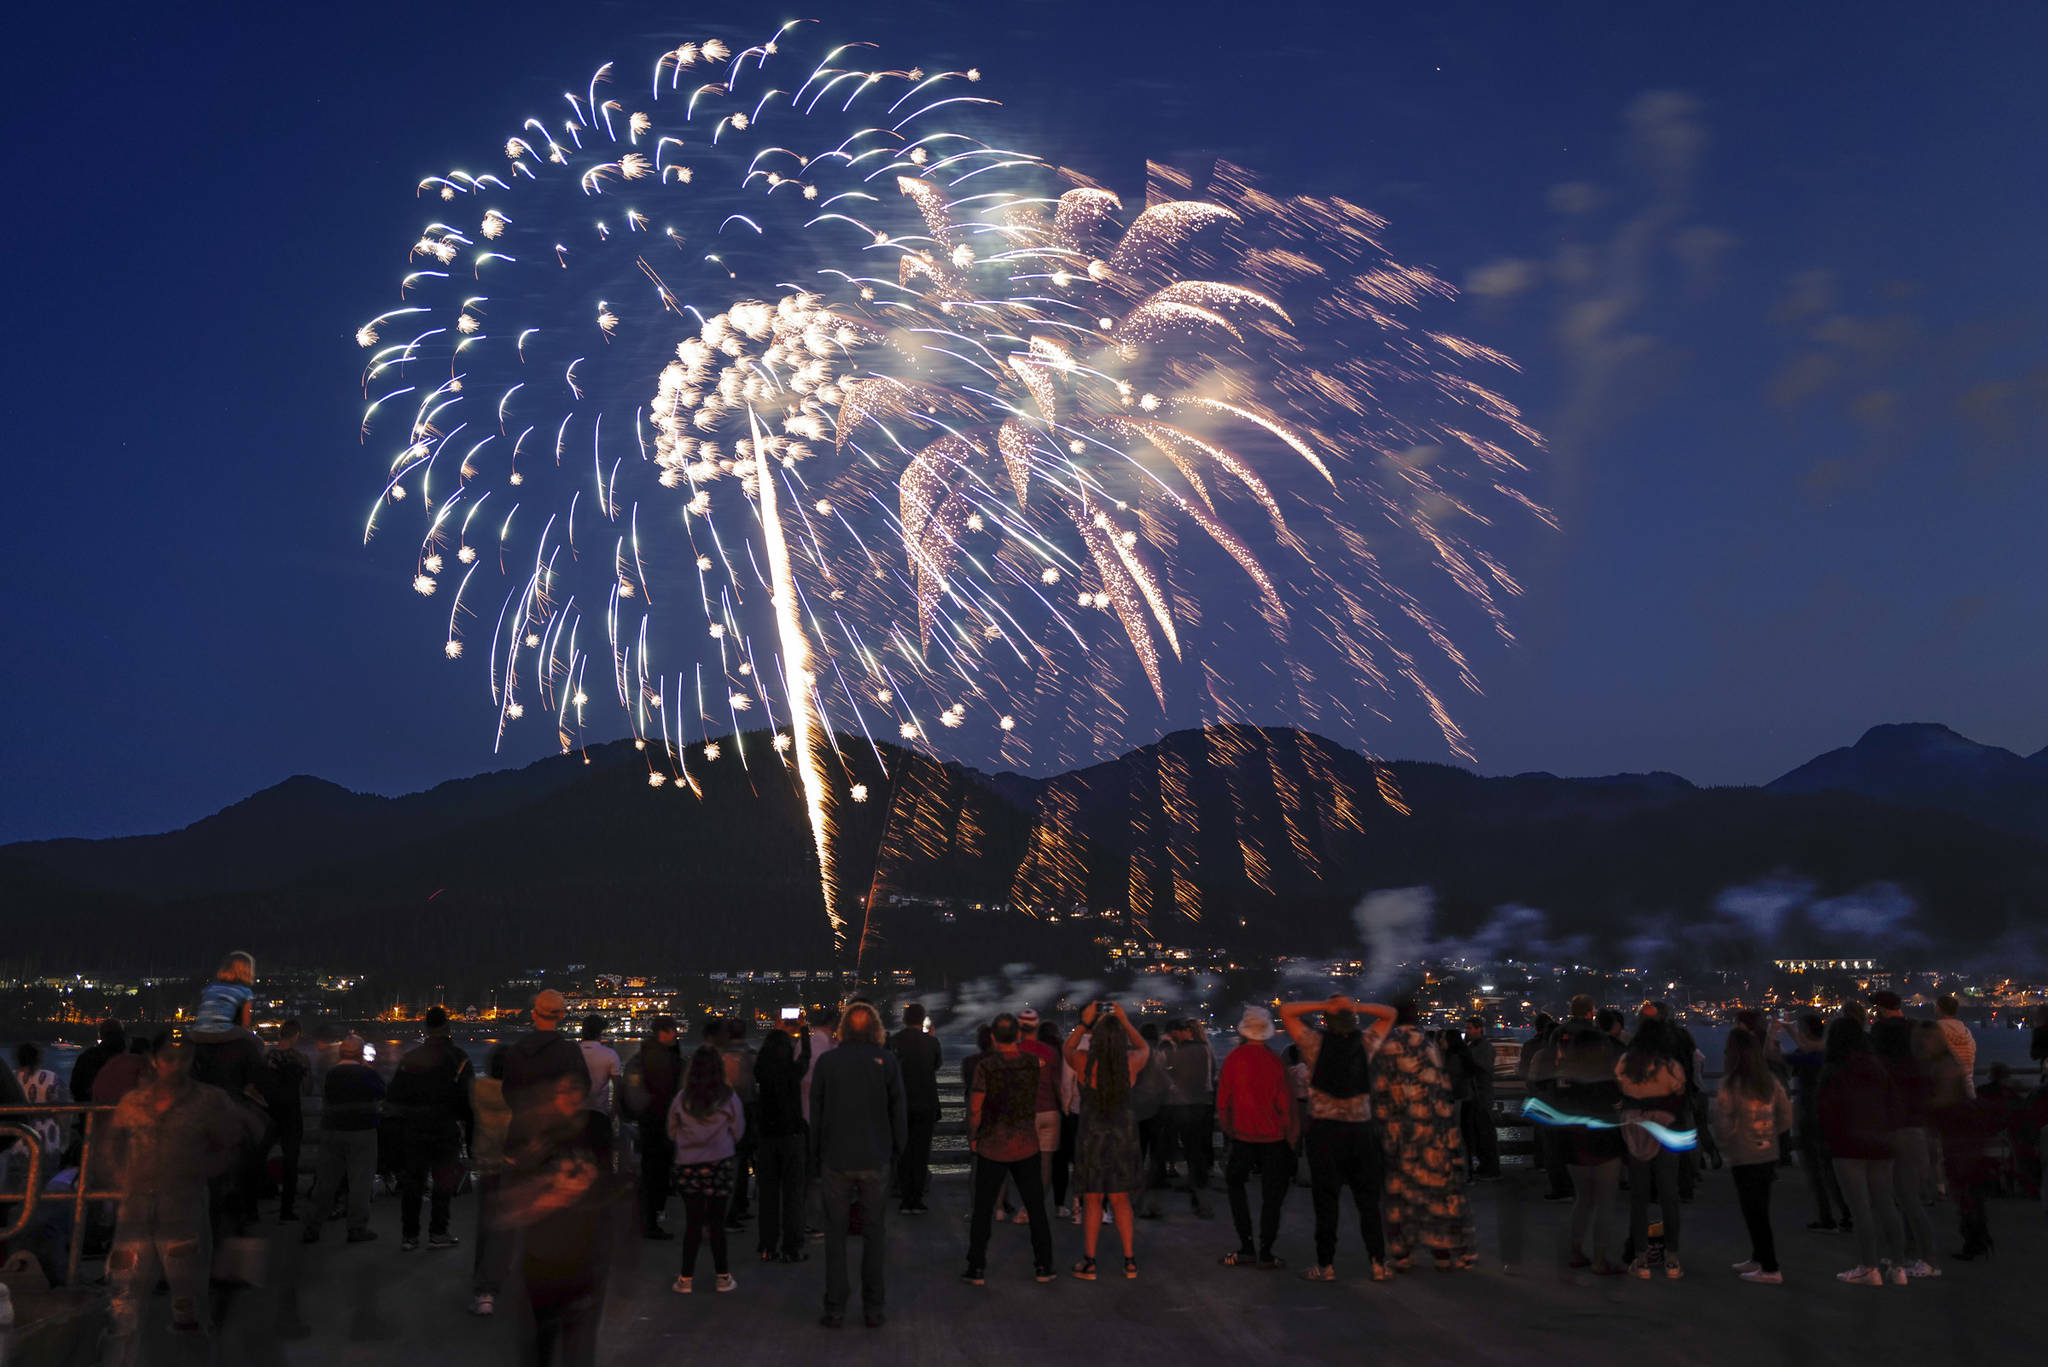 Juneau residents gather around the downtown waterfront to watch the annual fireworks display on Wednesday, July 3, 2019. (Michael Penn | Juneau Empire)